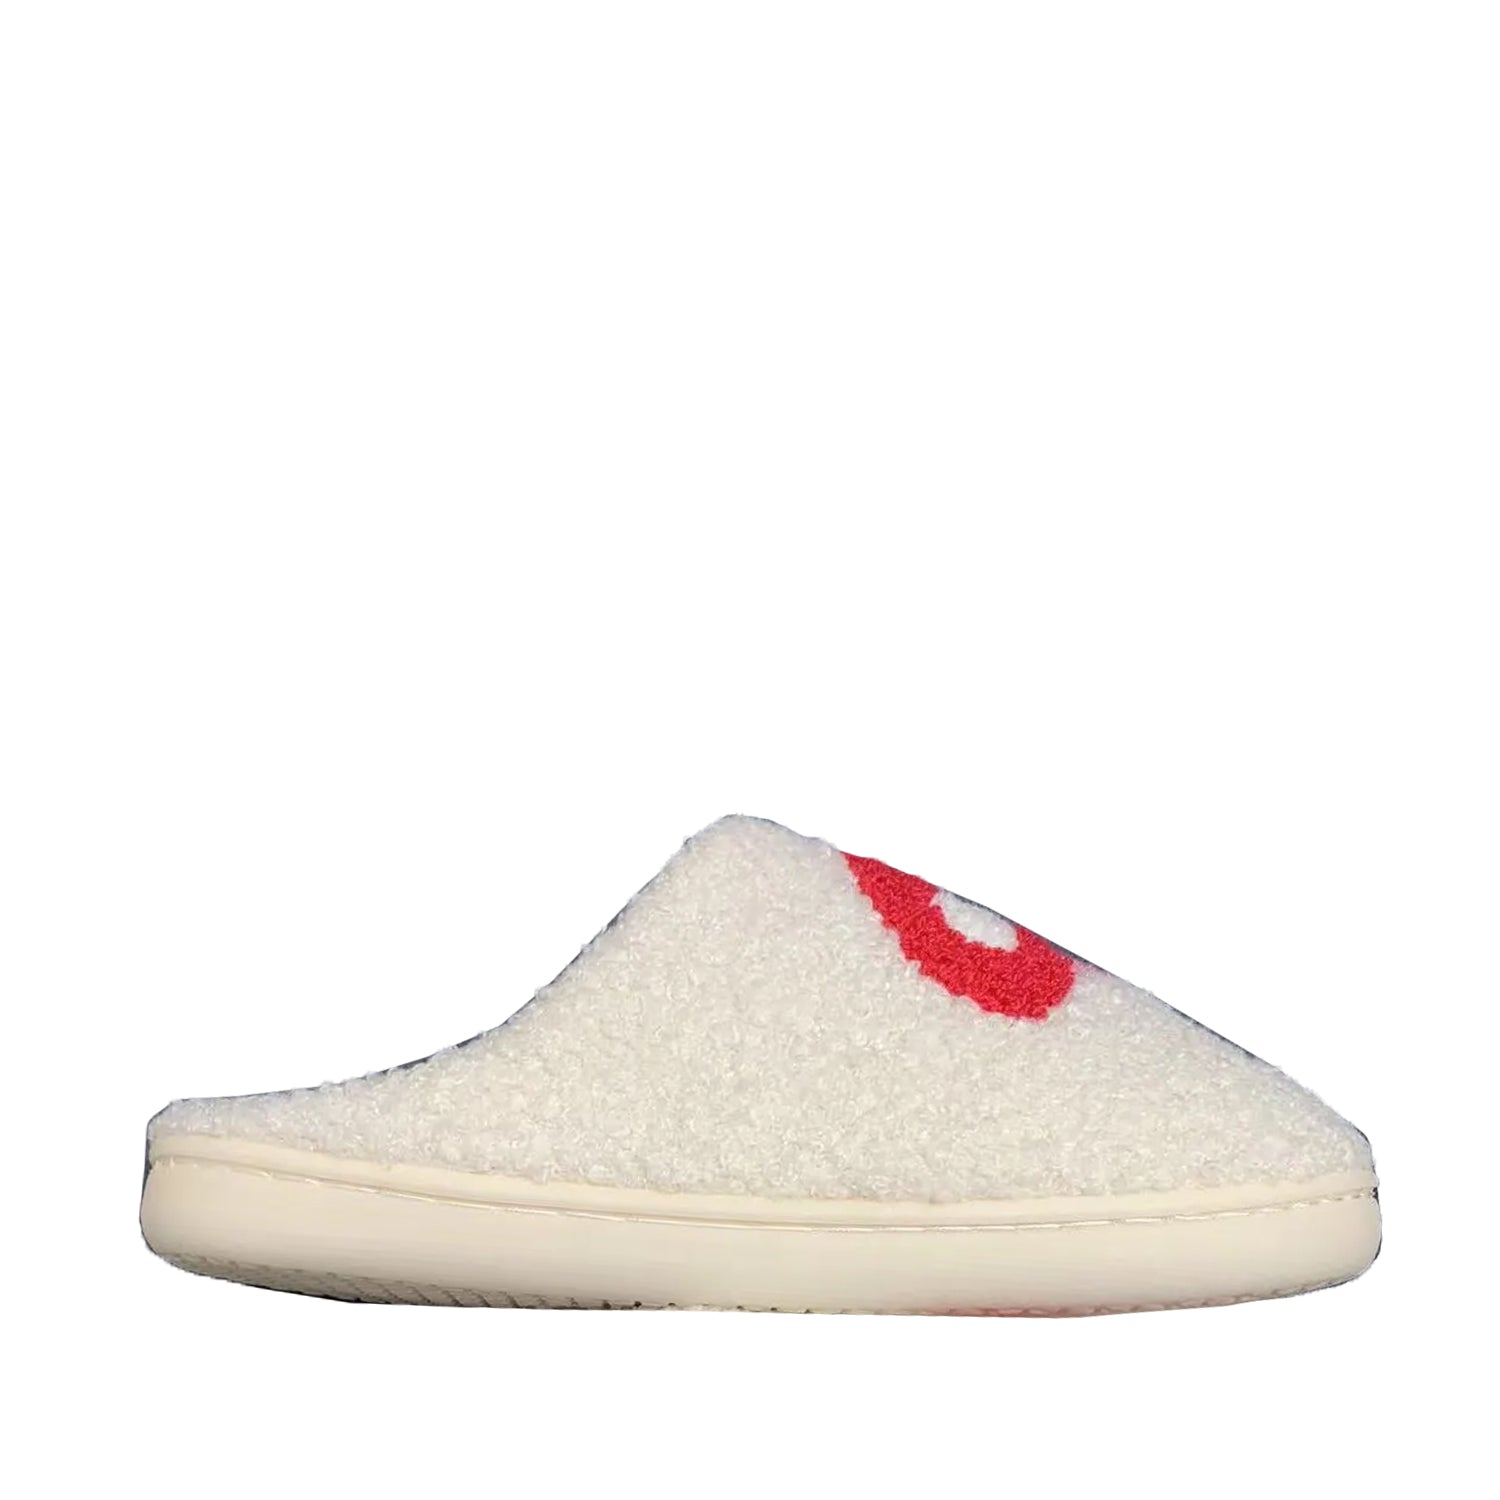 FLOOF Fun-guy Slippers in Red Pink